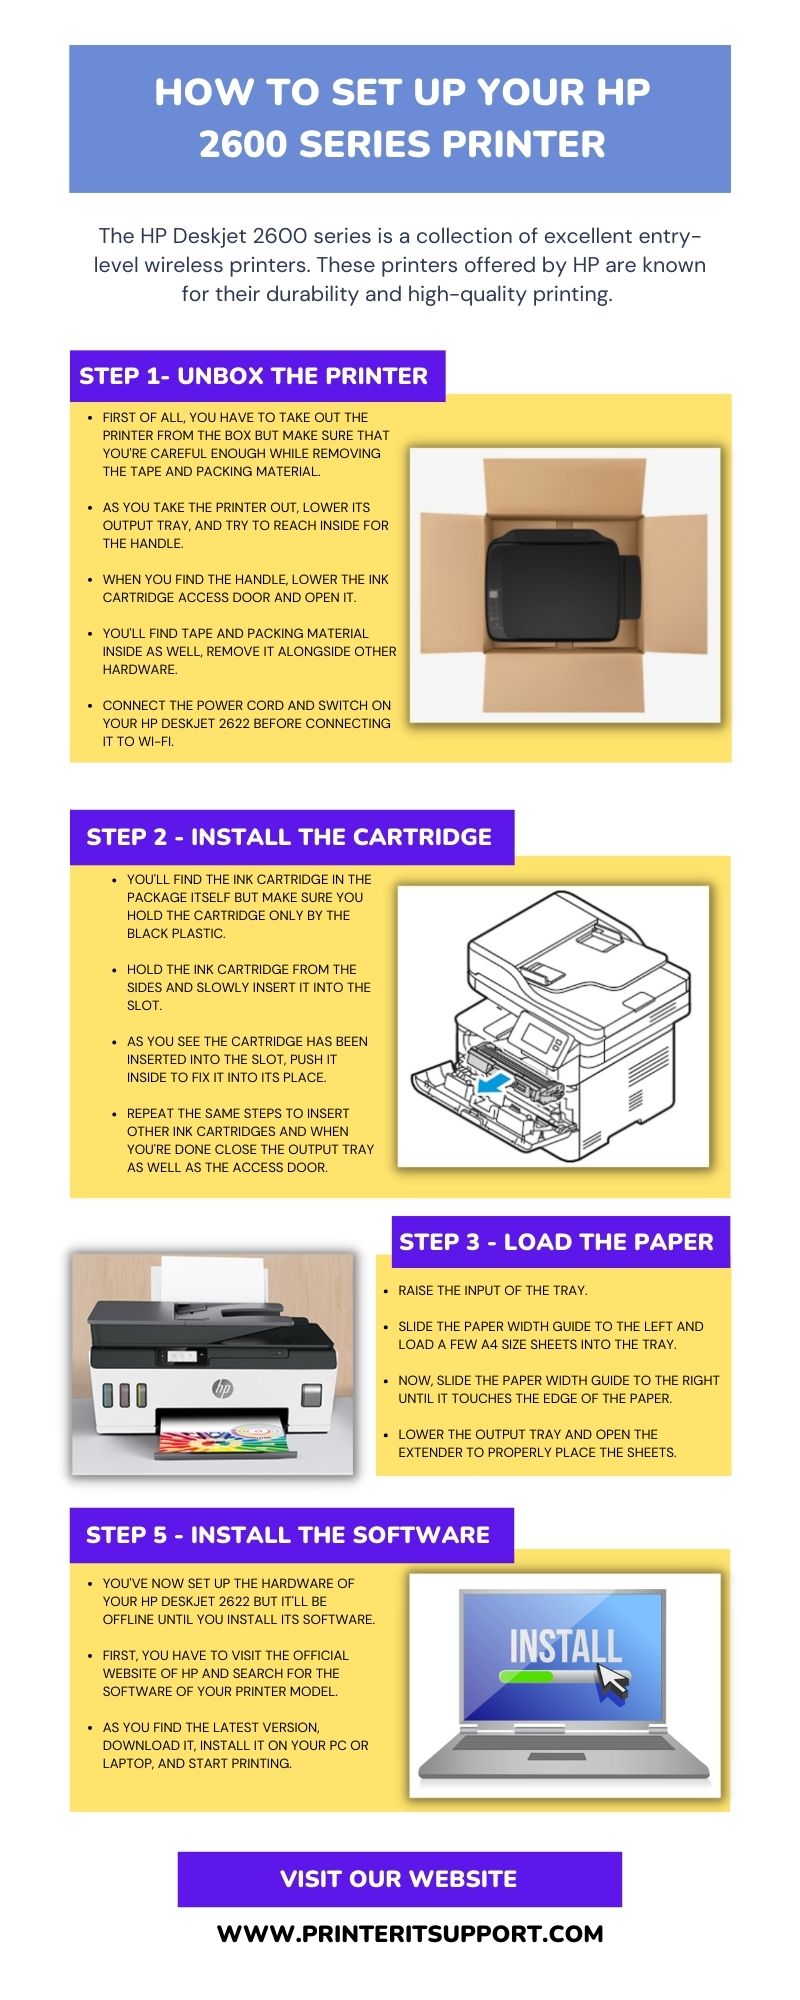 How To Set Up Your HP 2600 Series Printer